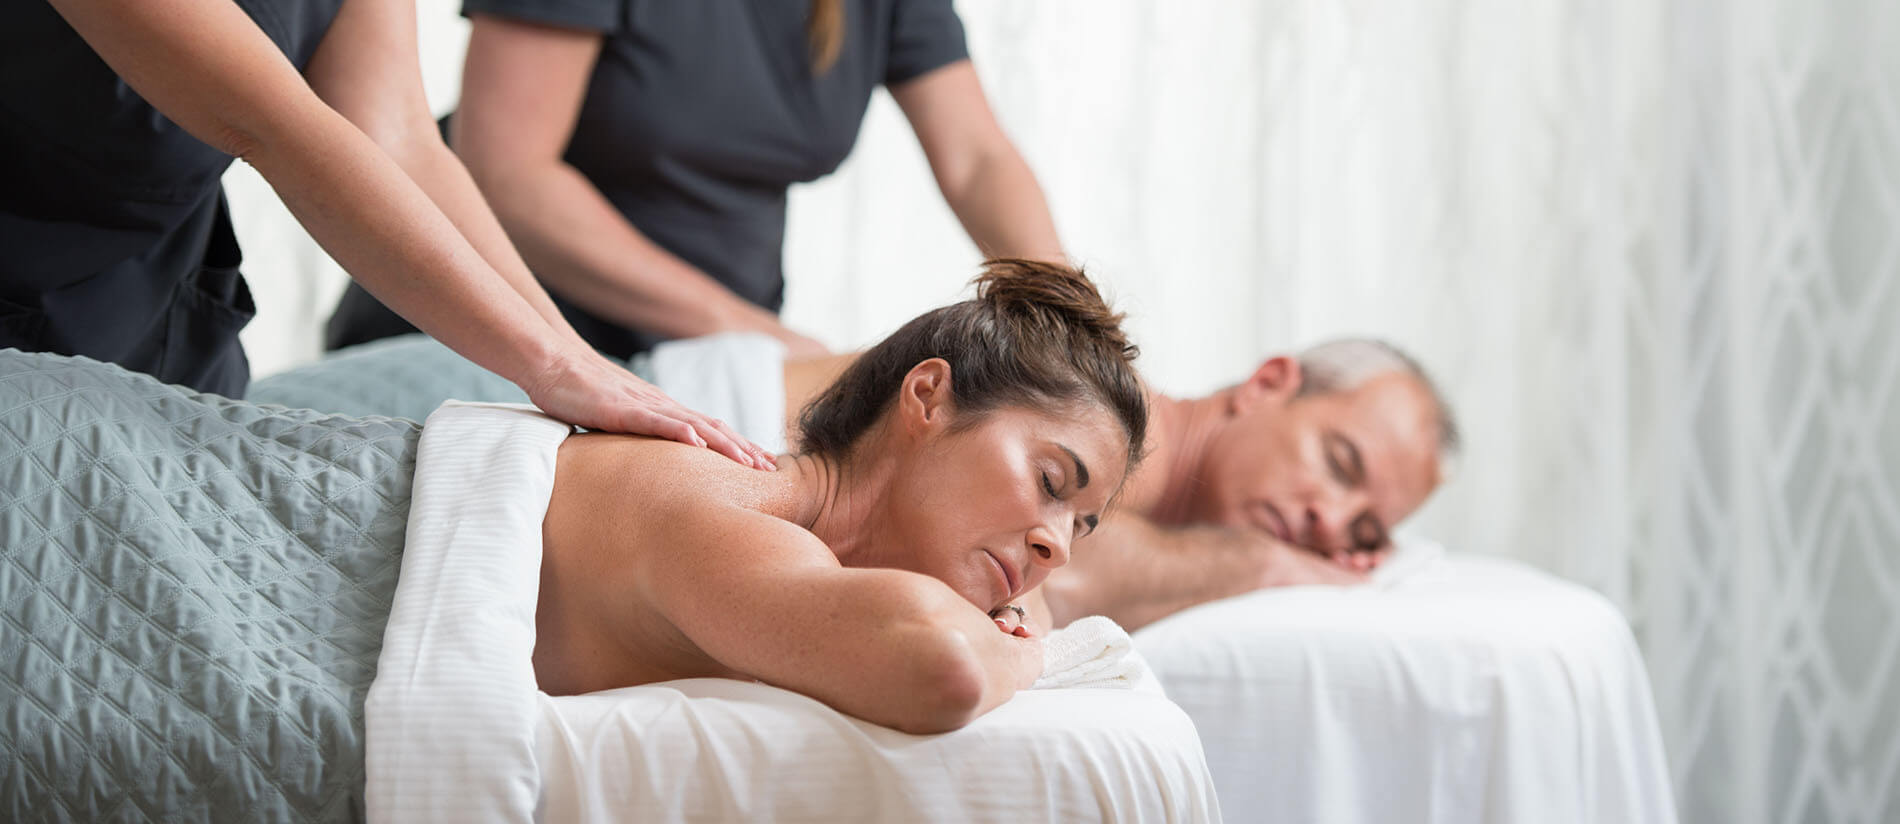 couple enjoys a romantic couples massage at one of the best spas in Florida for couples